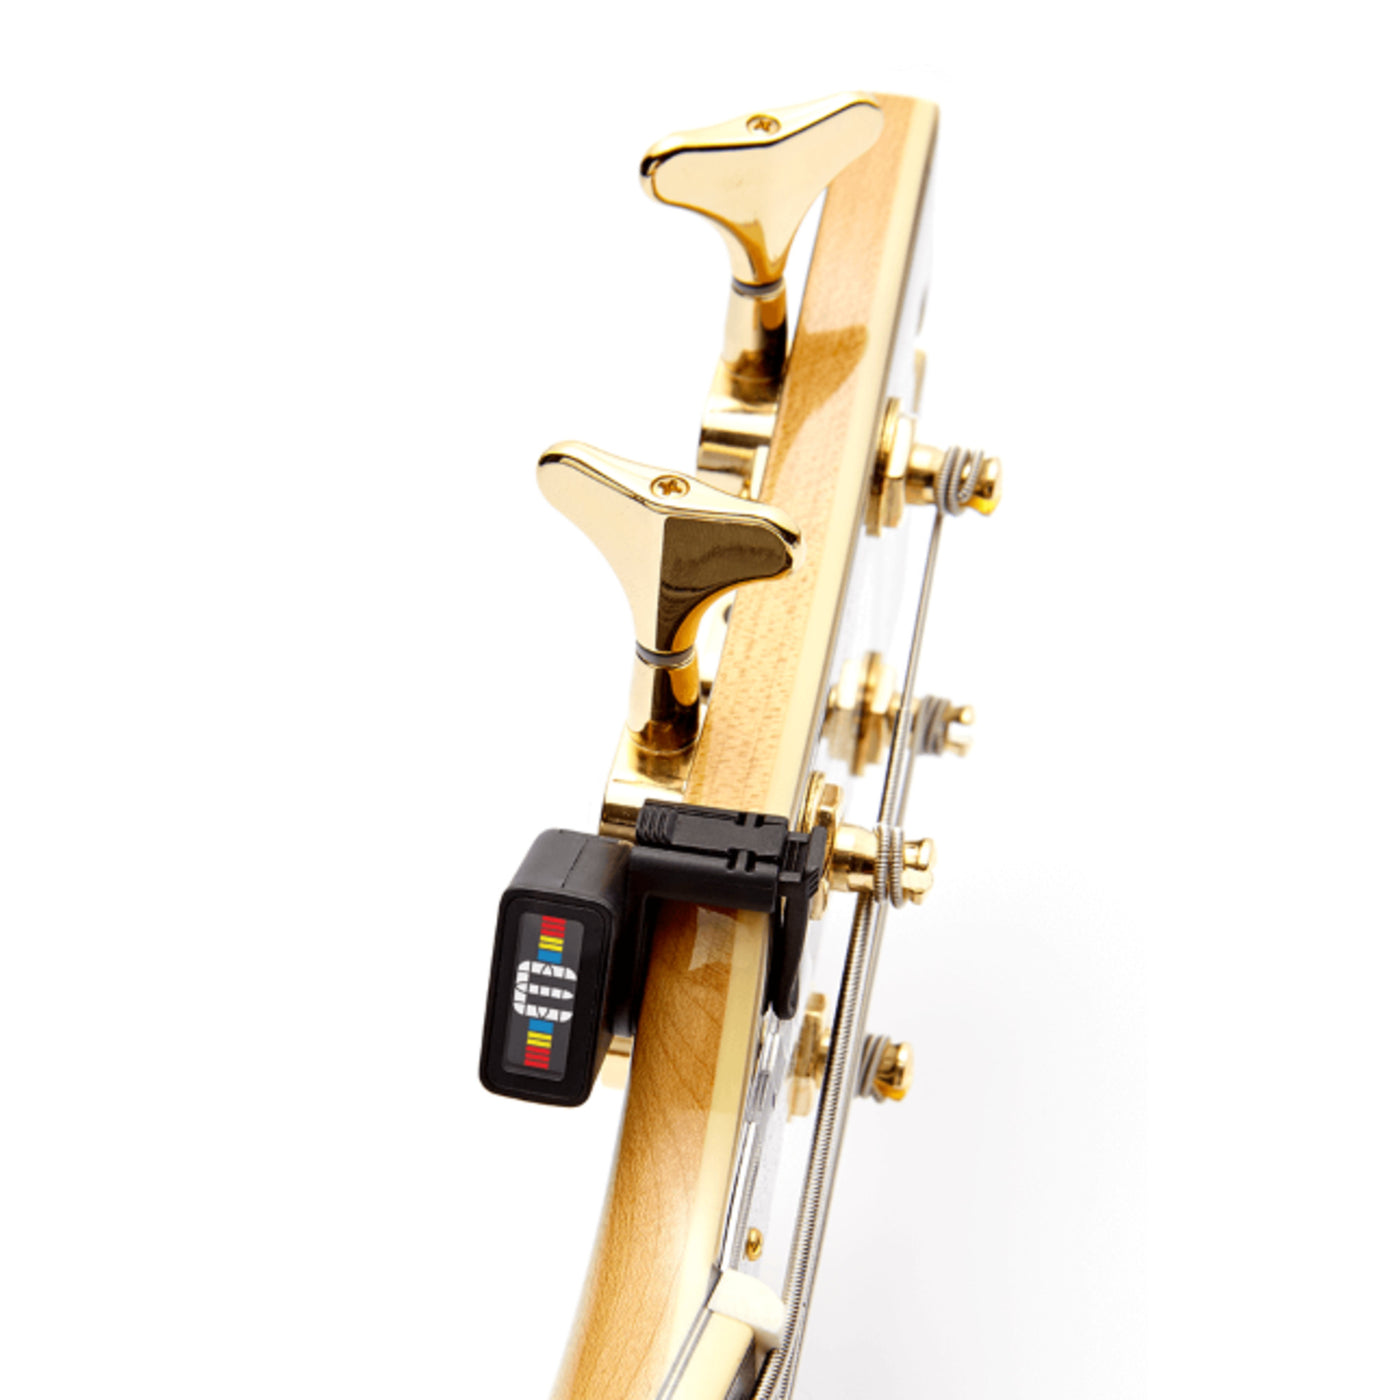 D'Addario Micro Headstock Tuner, 2-Pack (PW-CT-12TP)